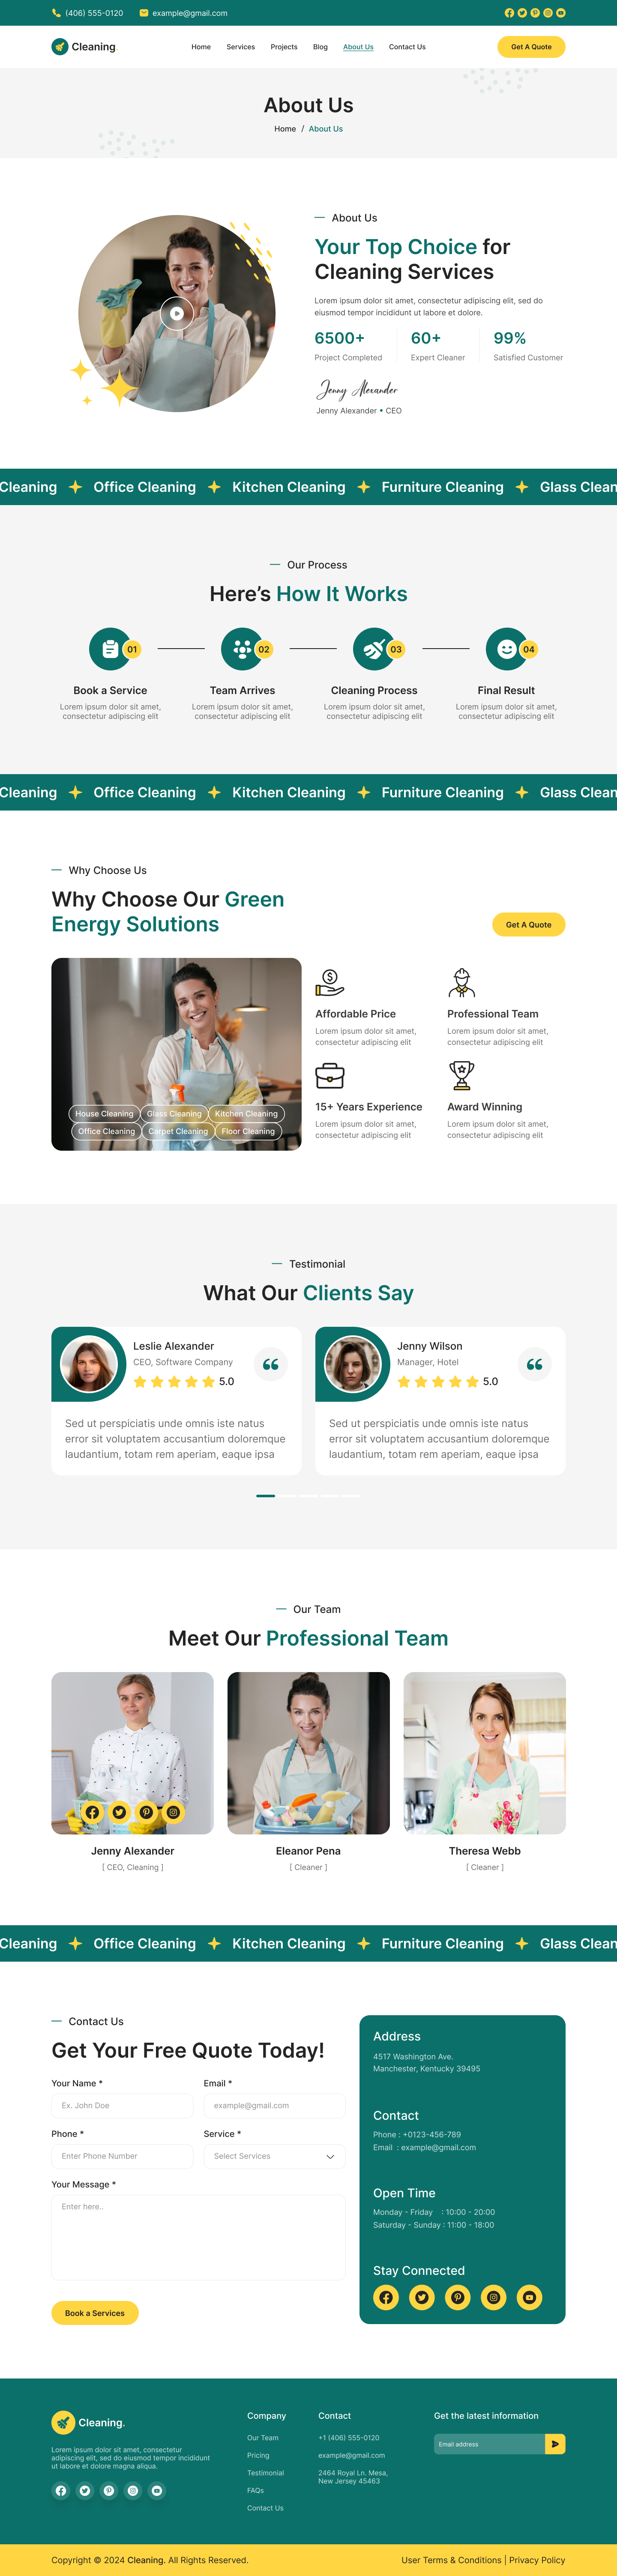 cleaning service website About Us Page figma design